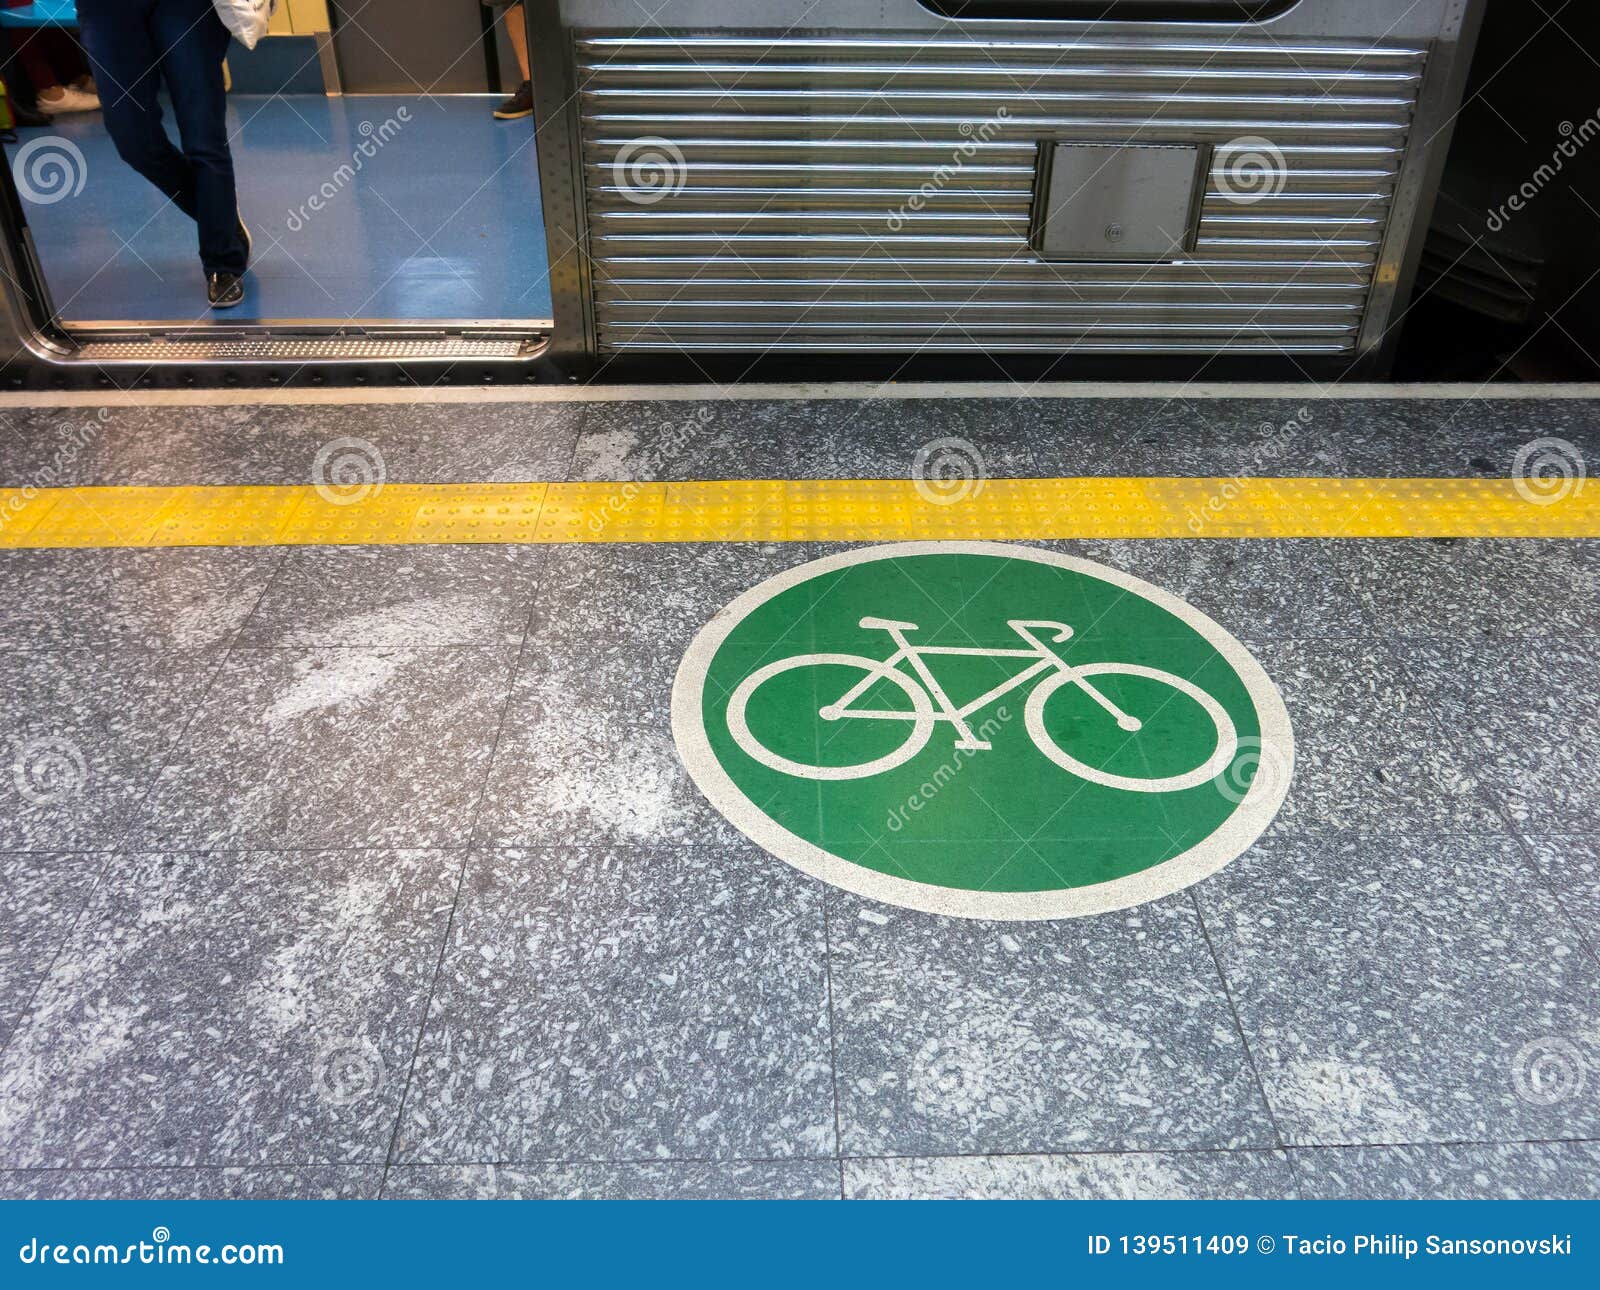 adhesive plate on the ground indicating bicycle access area in brazilian subway